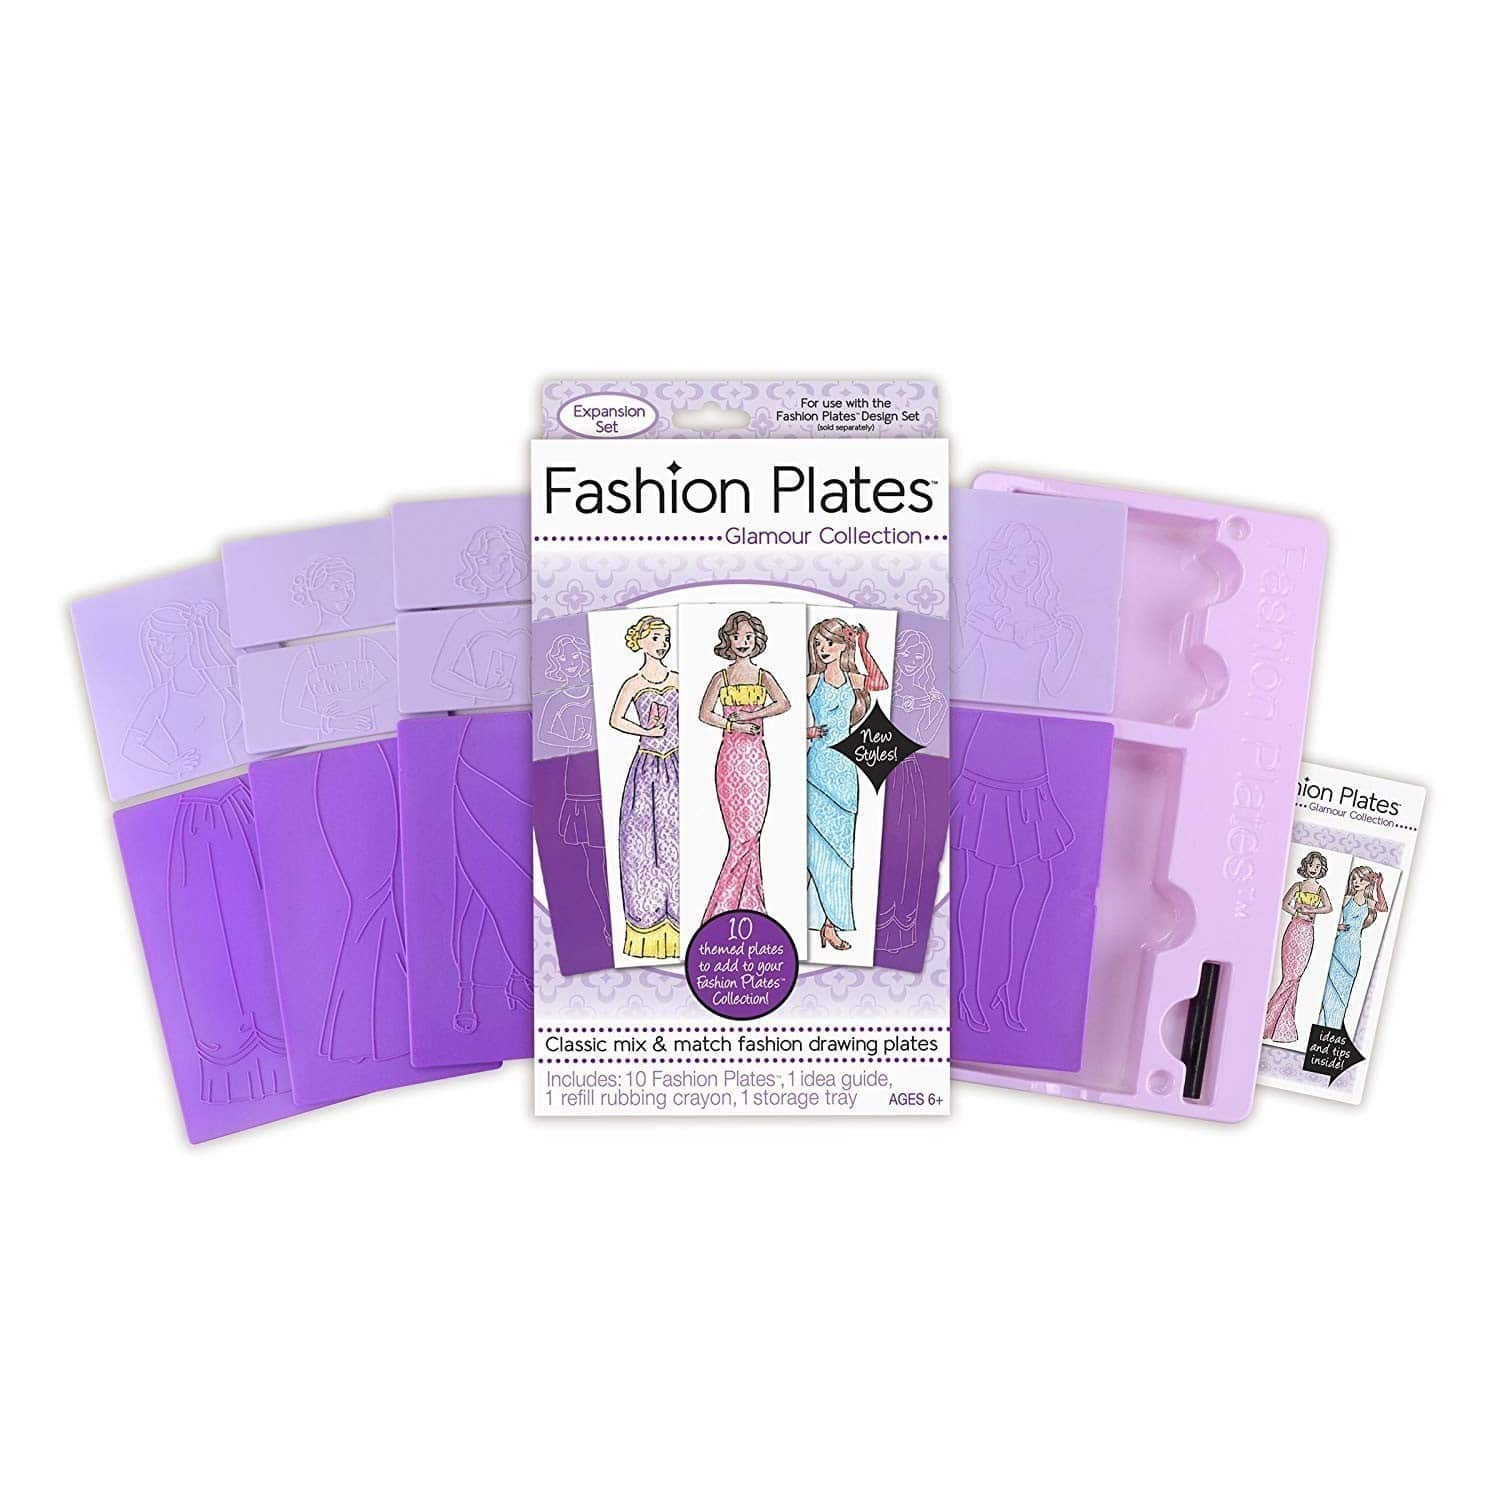 Fashion Plates - Glamour Collection Expansion Set